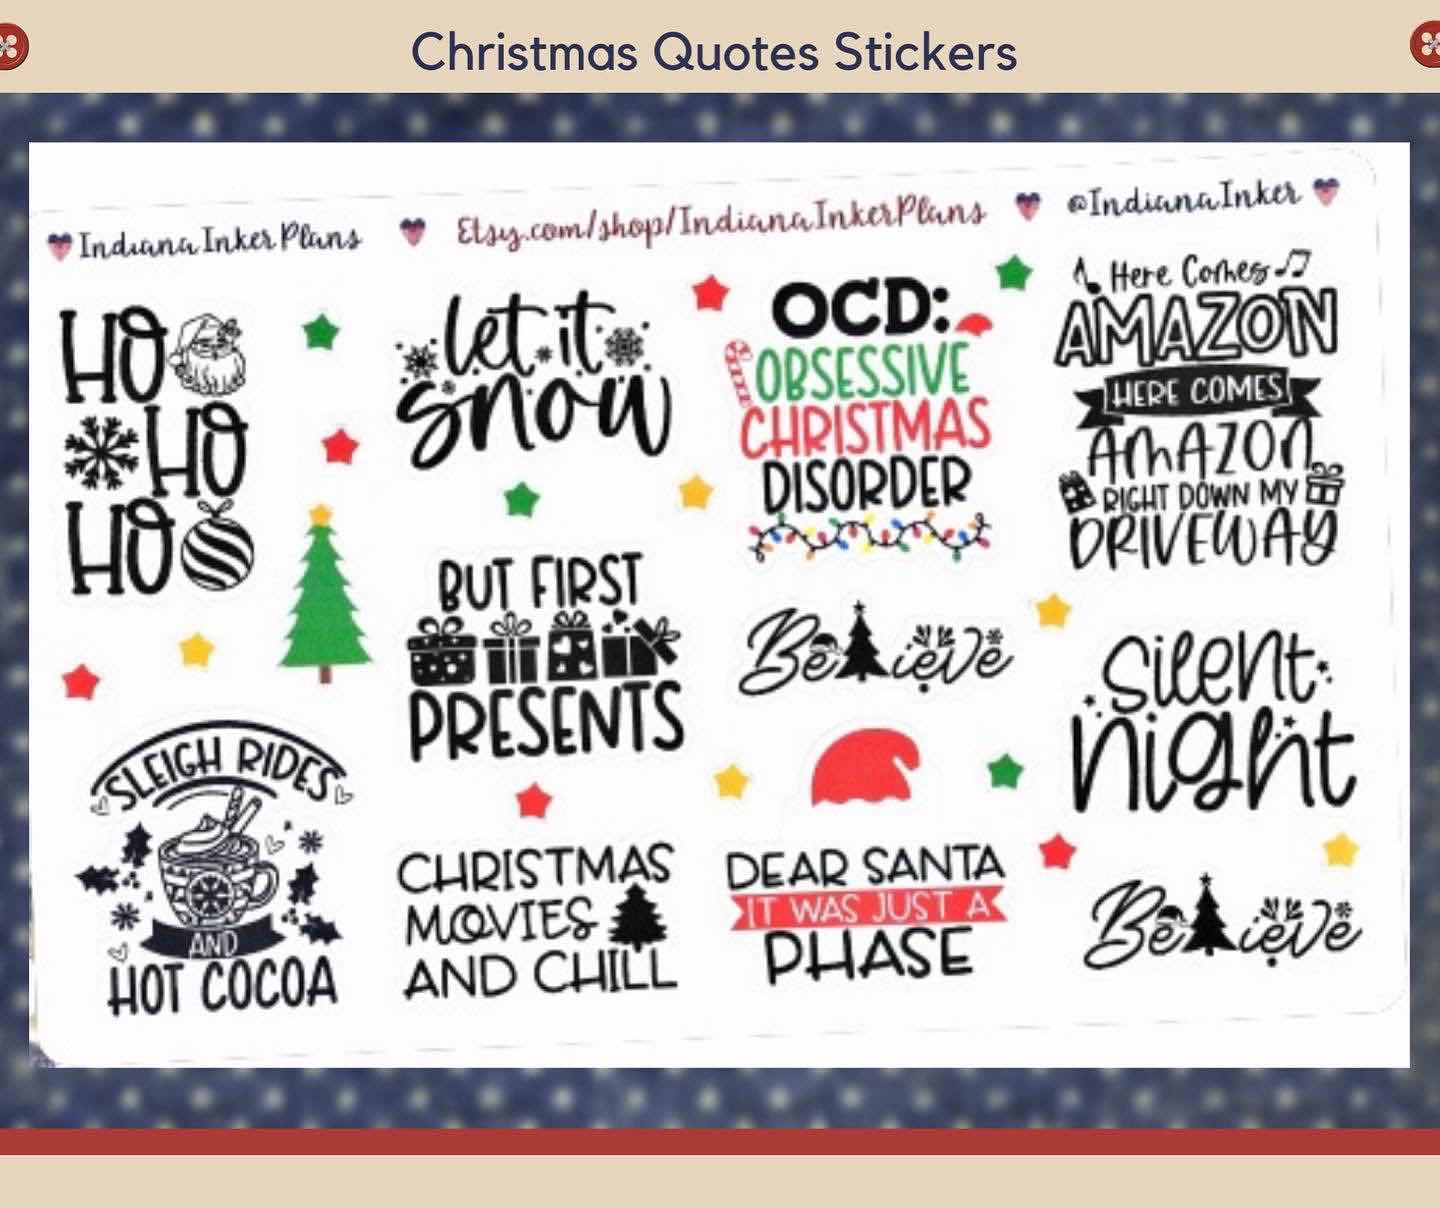 Christmas quote stickers